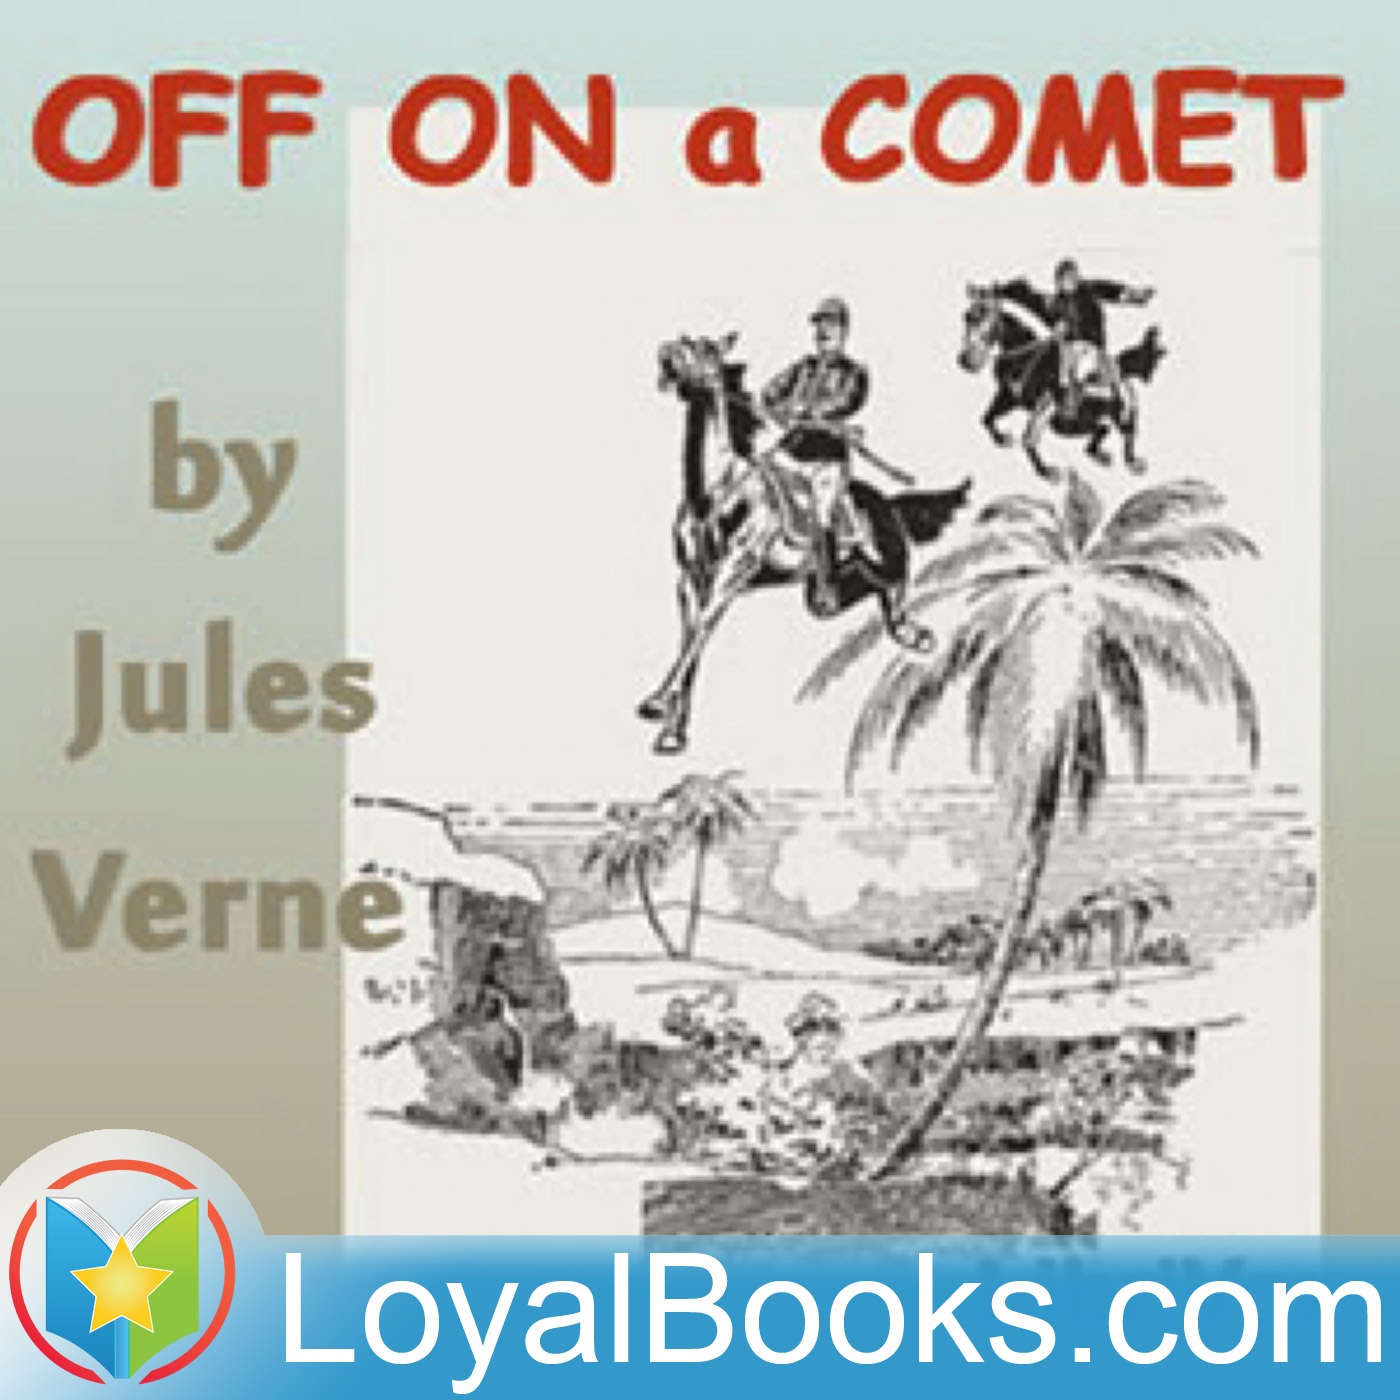 Off on a Comet by Jules Verne